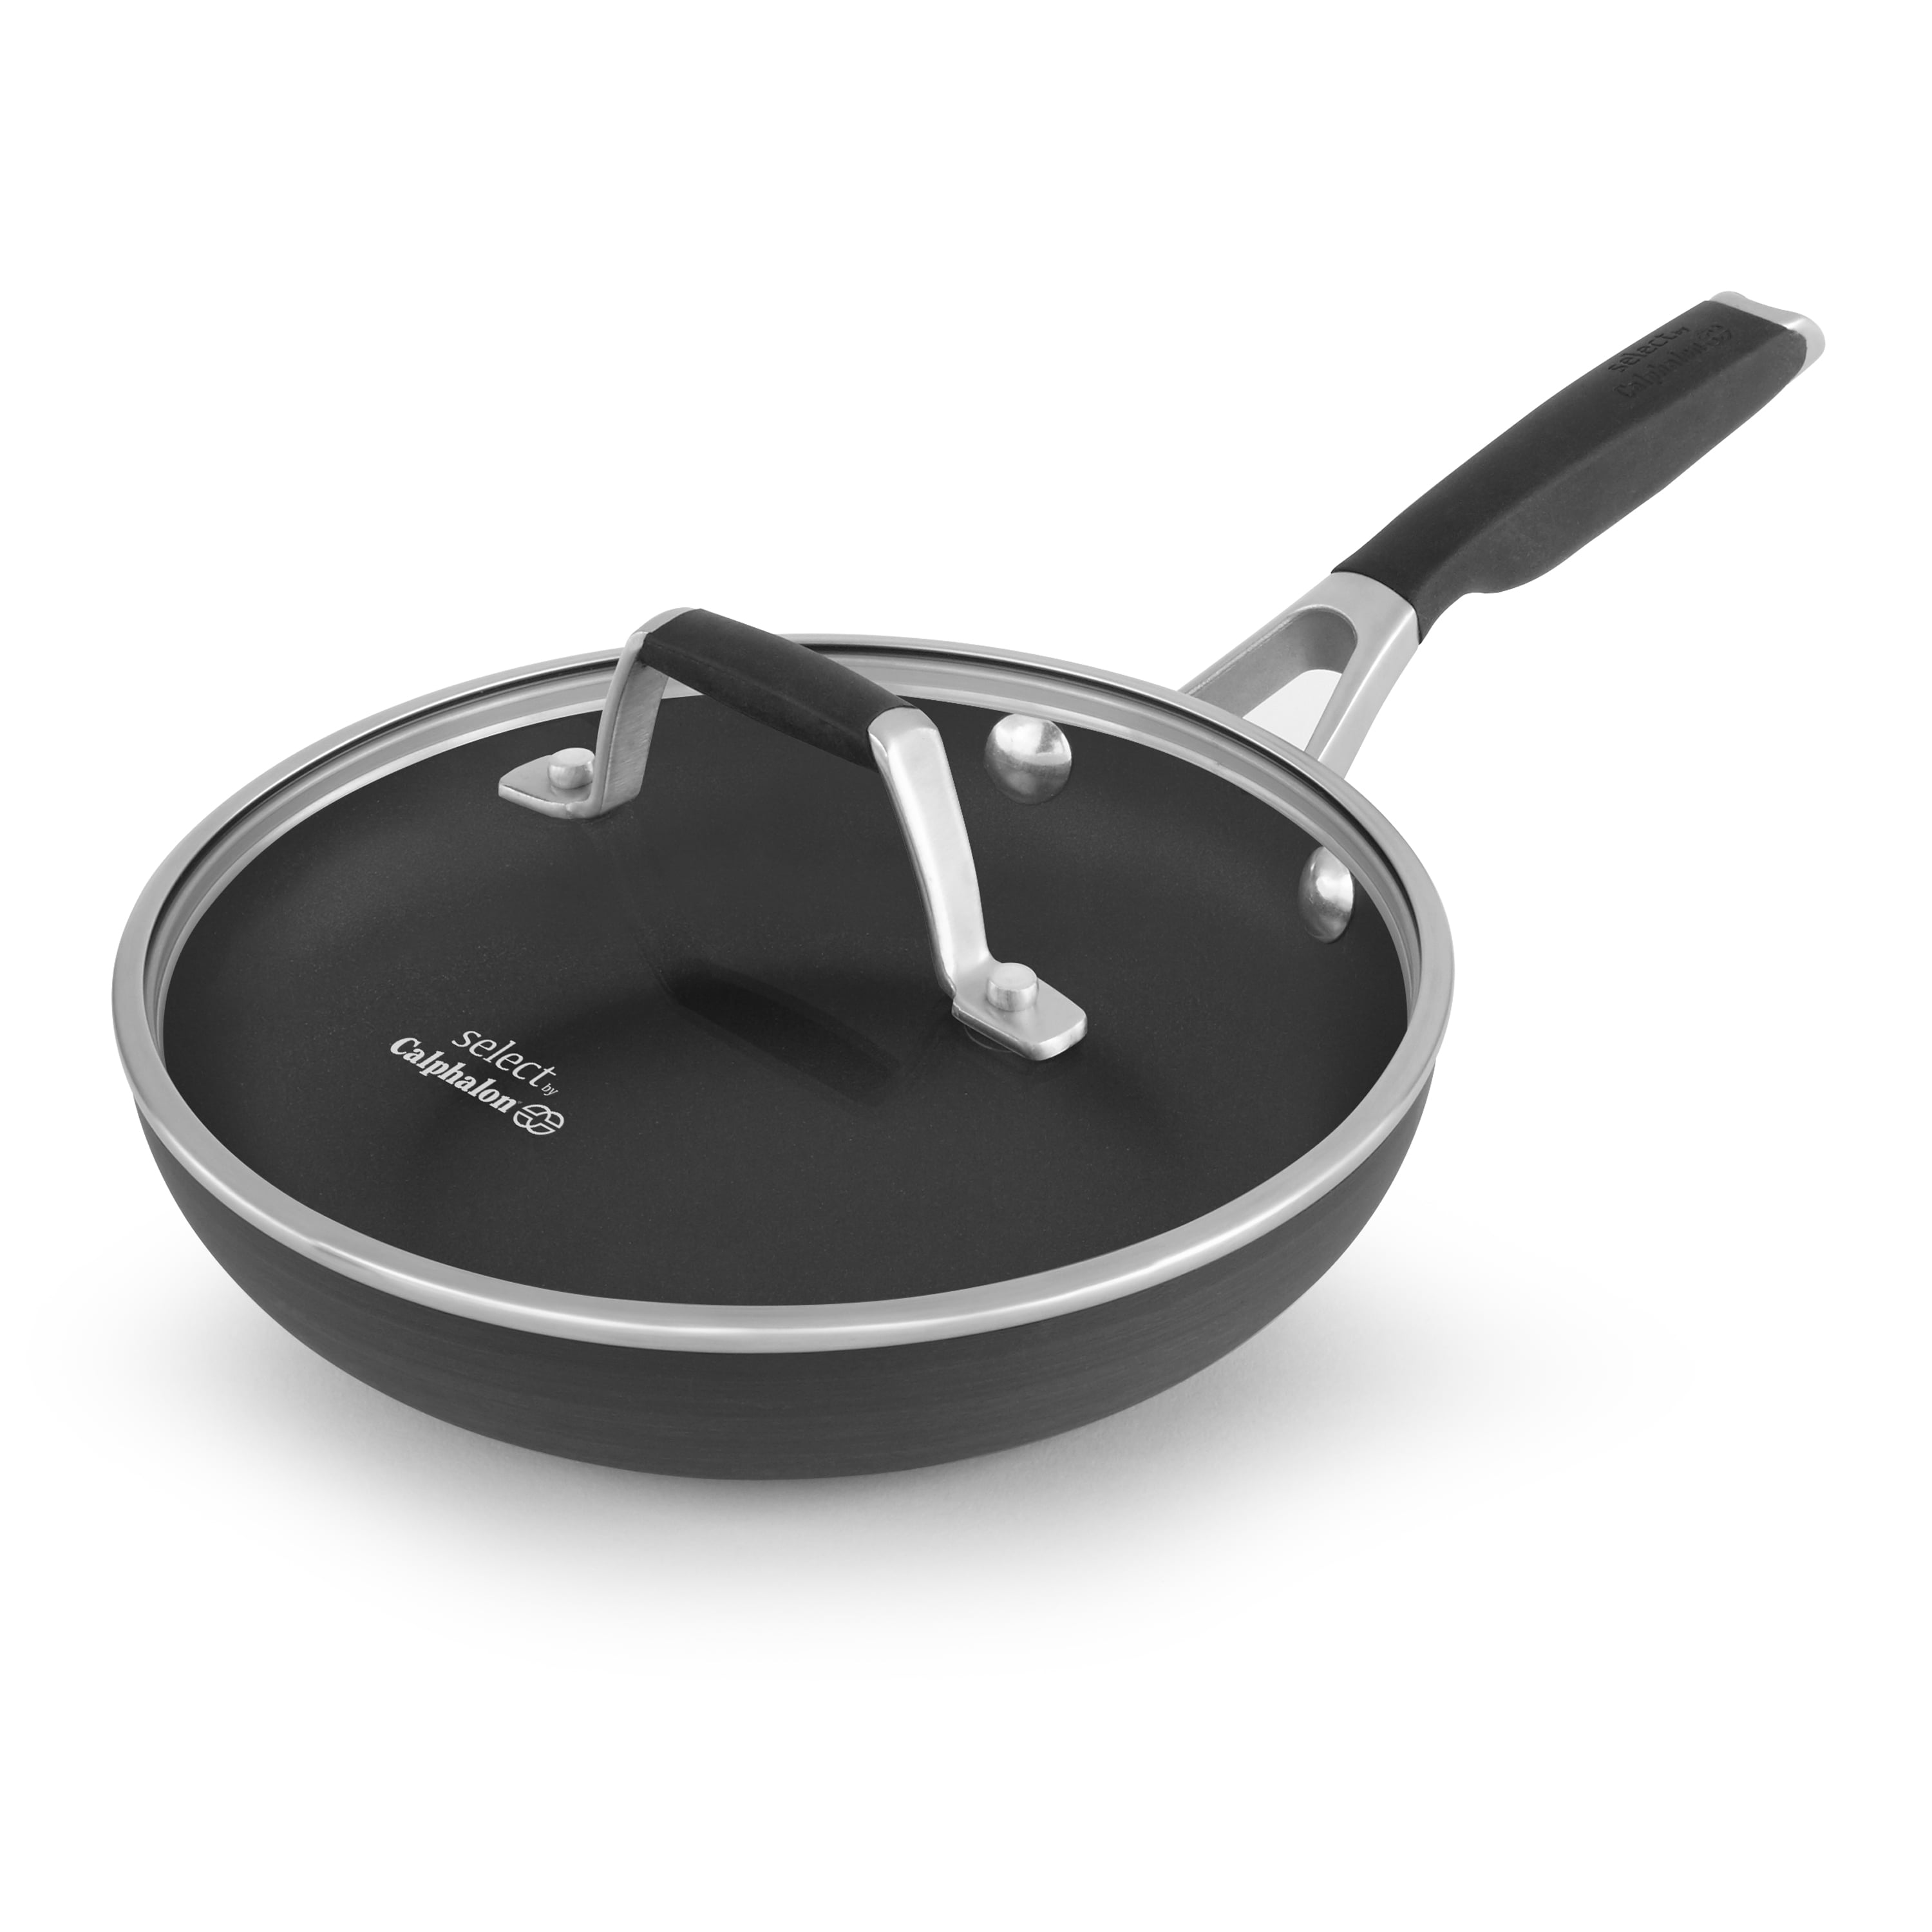 Select by Calphalon Hard-Anodized Nonstick 8-Inch Fry Pan with Cover 1388